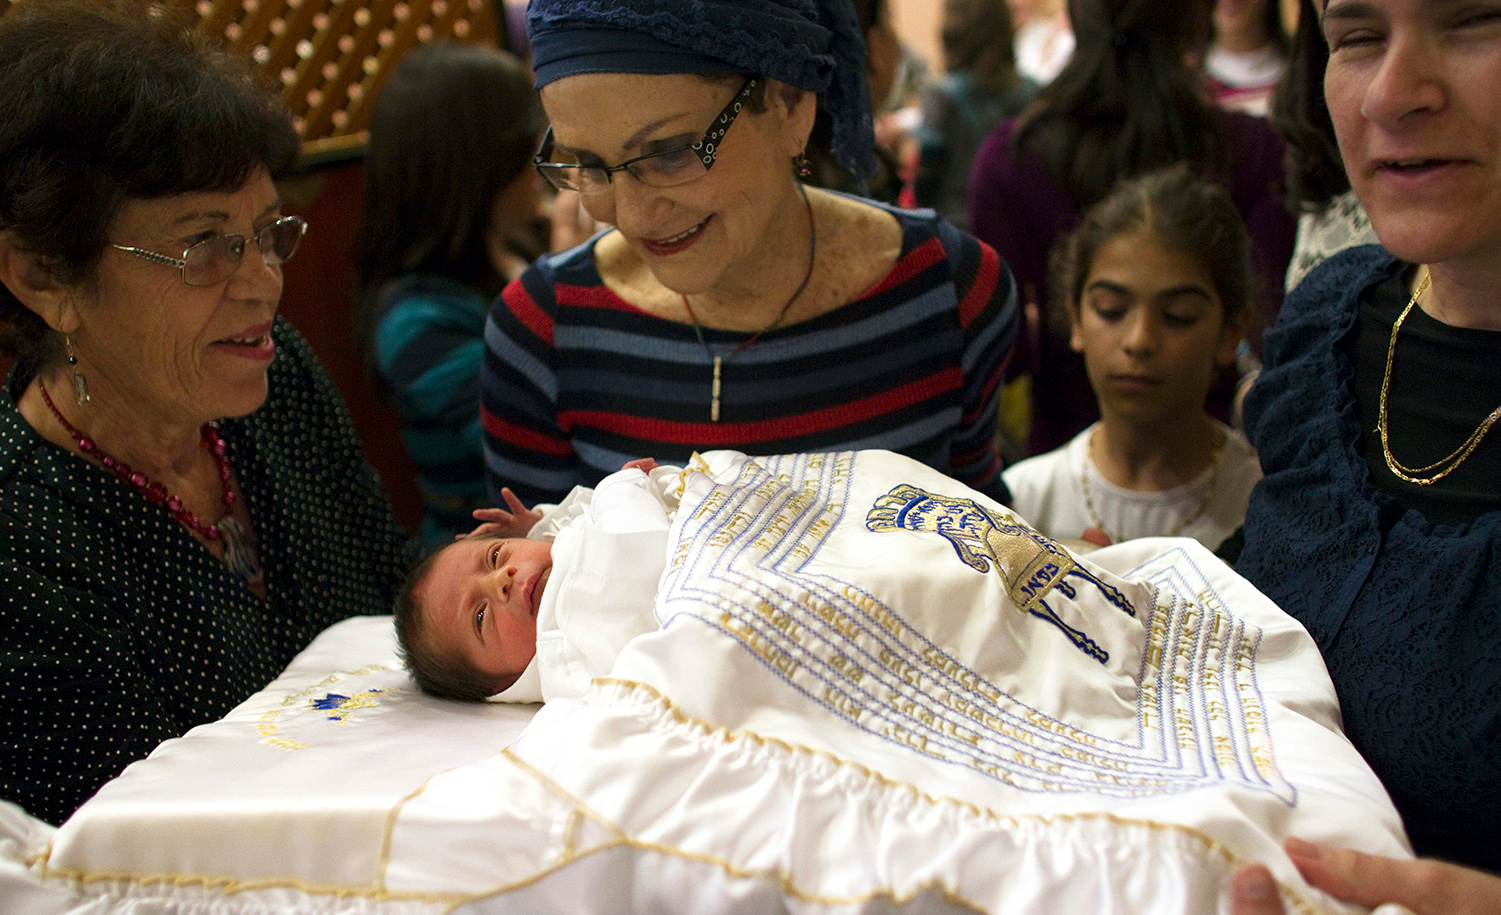 
A baby and relatives after his circumcision. REUTERS/Ronen Zvulun.

